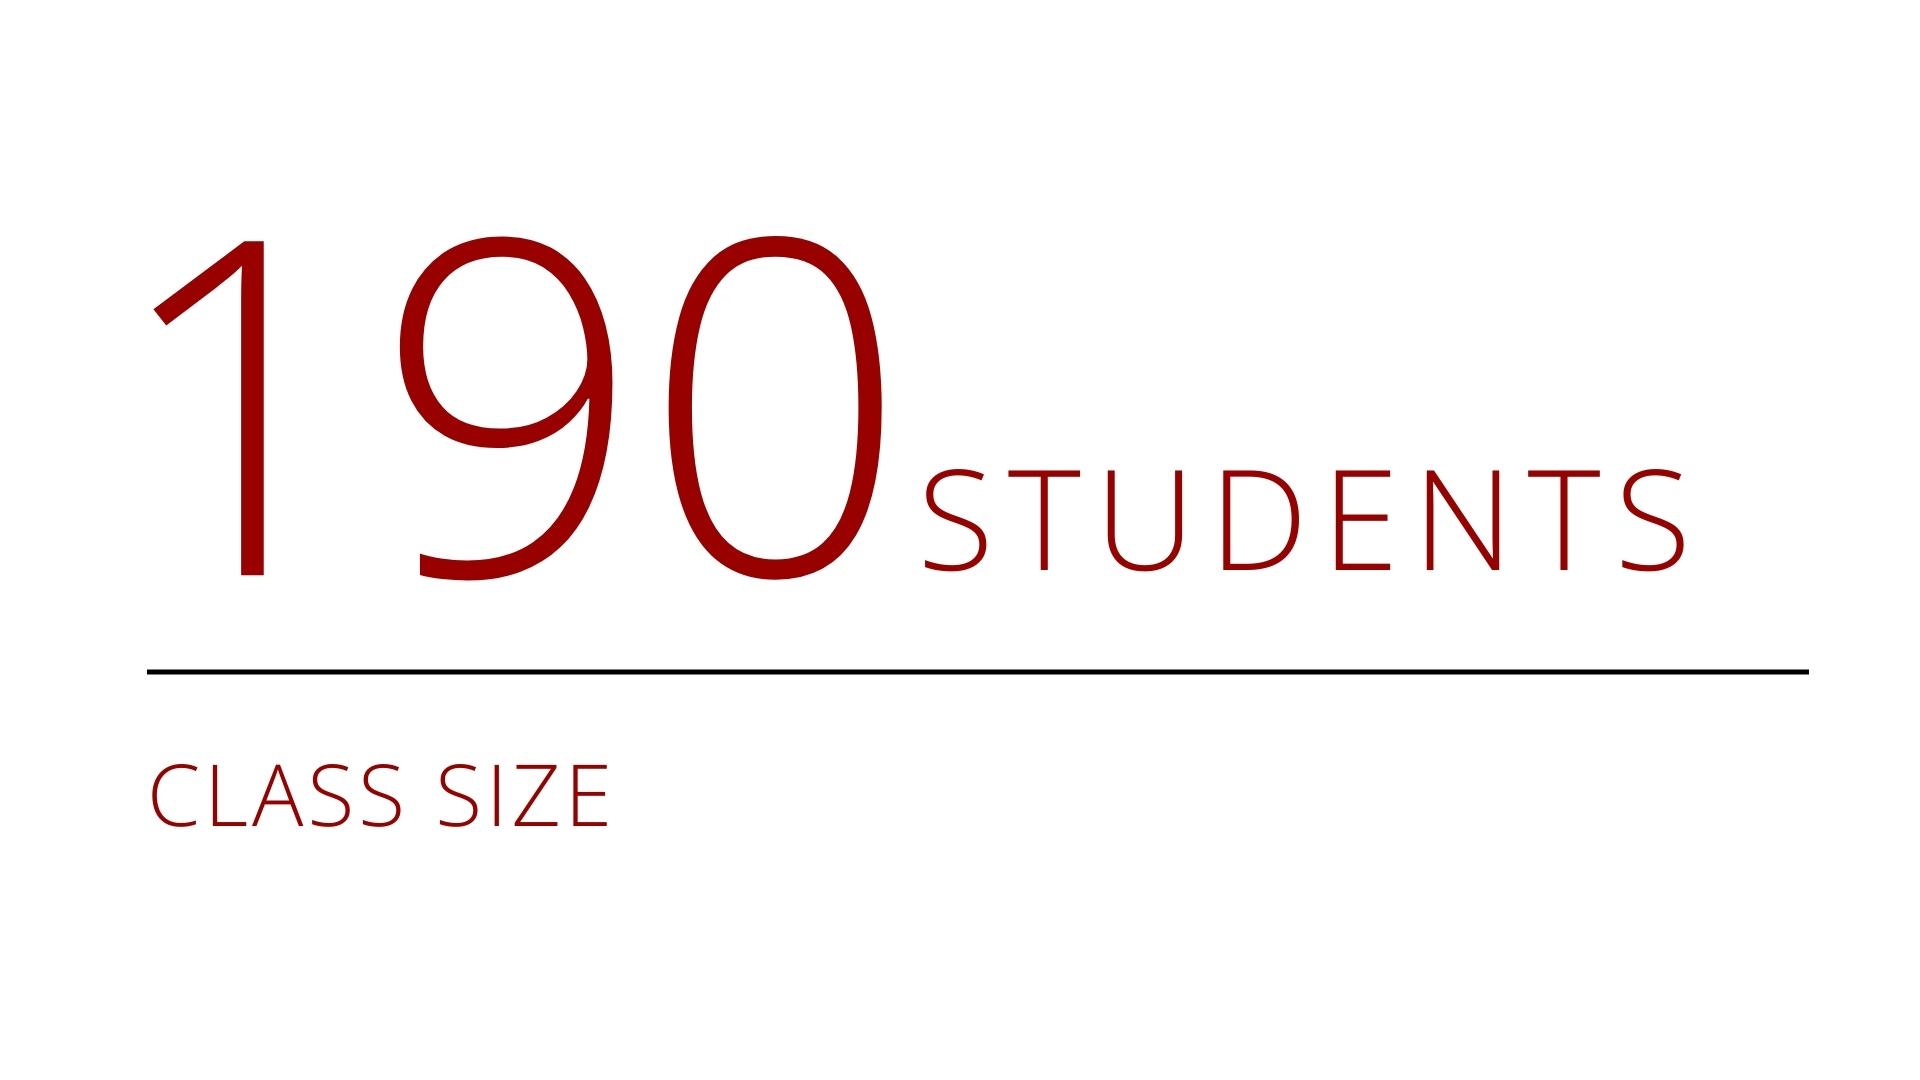 190 students - class size